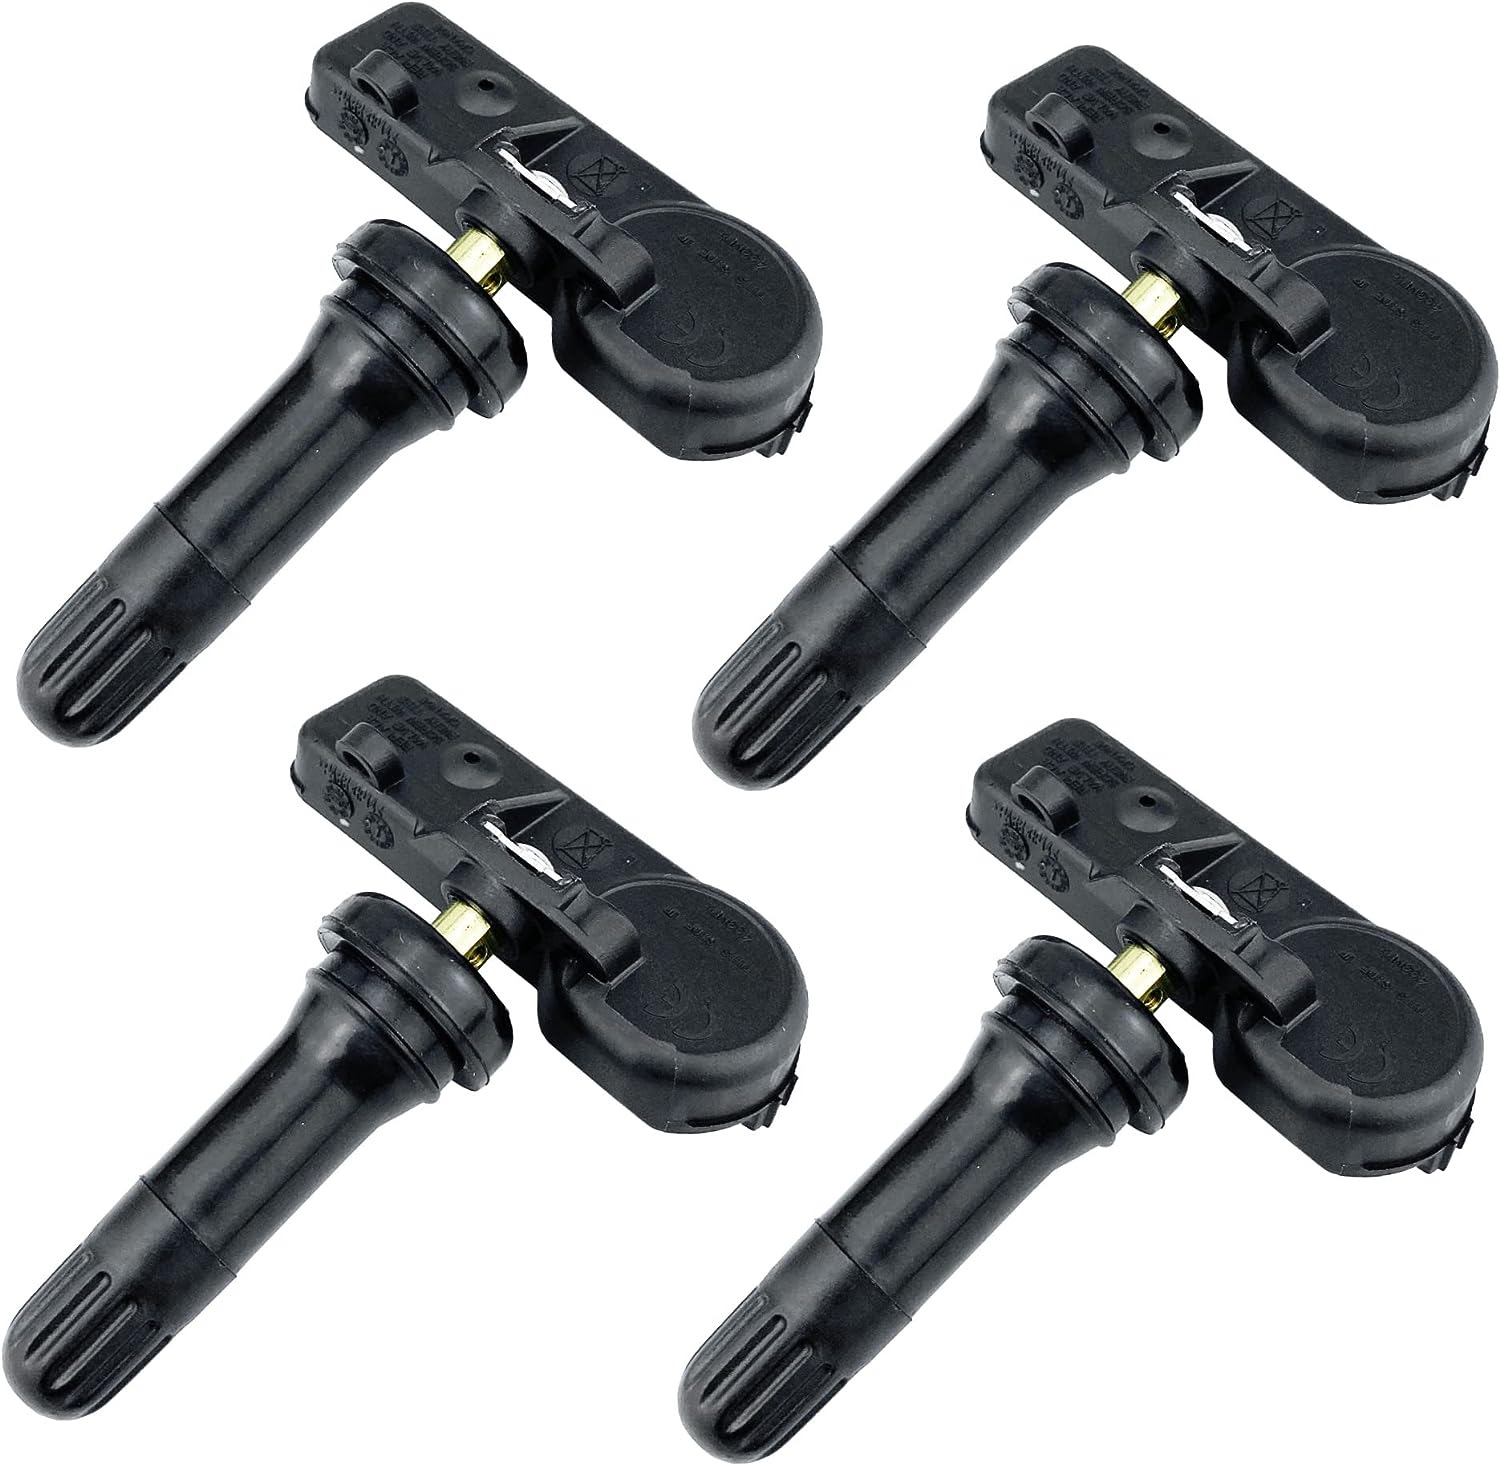 Set of 4 TPMS Tire Pressure Monitoring System Sensor 433Mhz Compatible with Jee